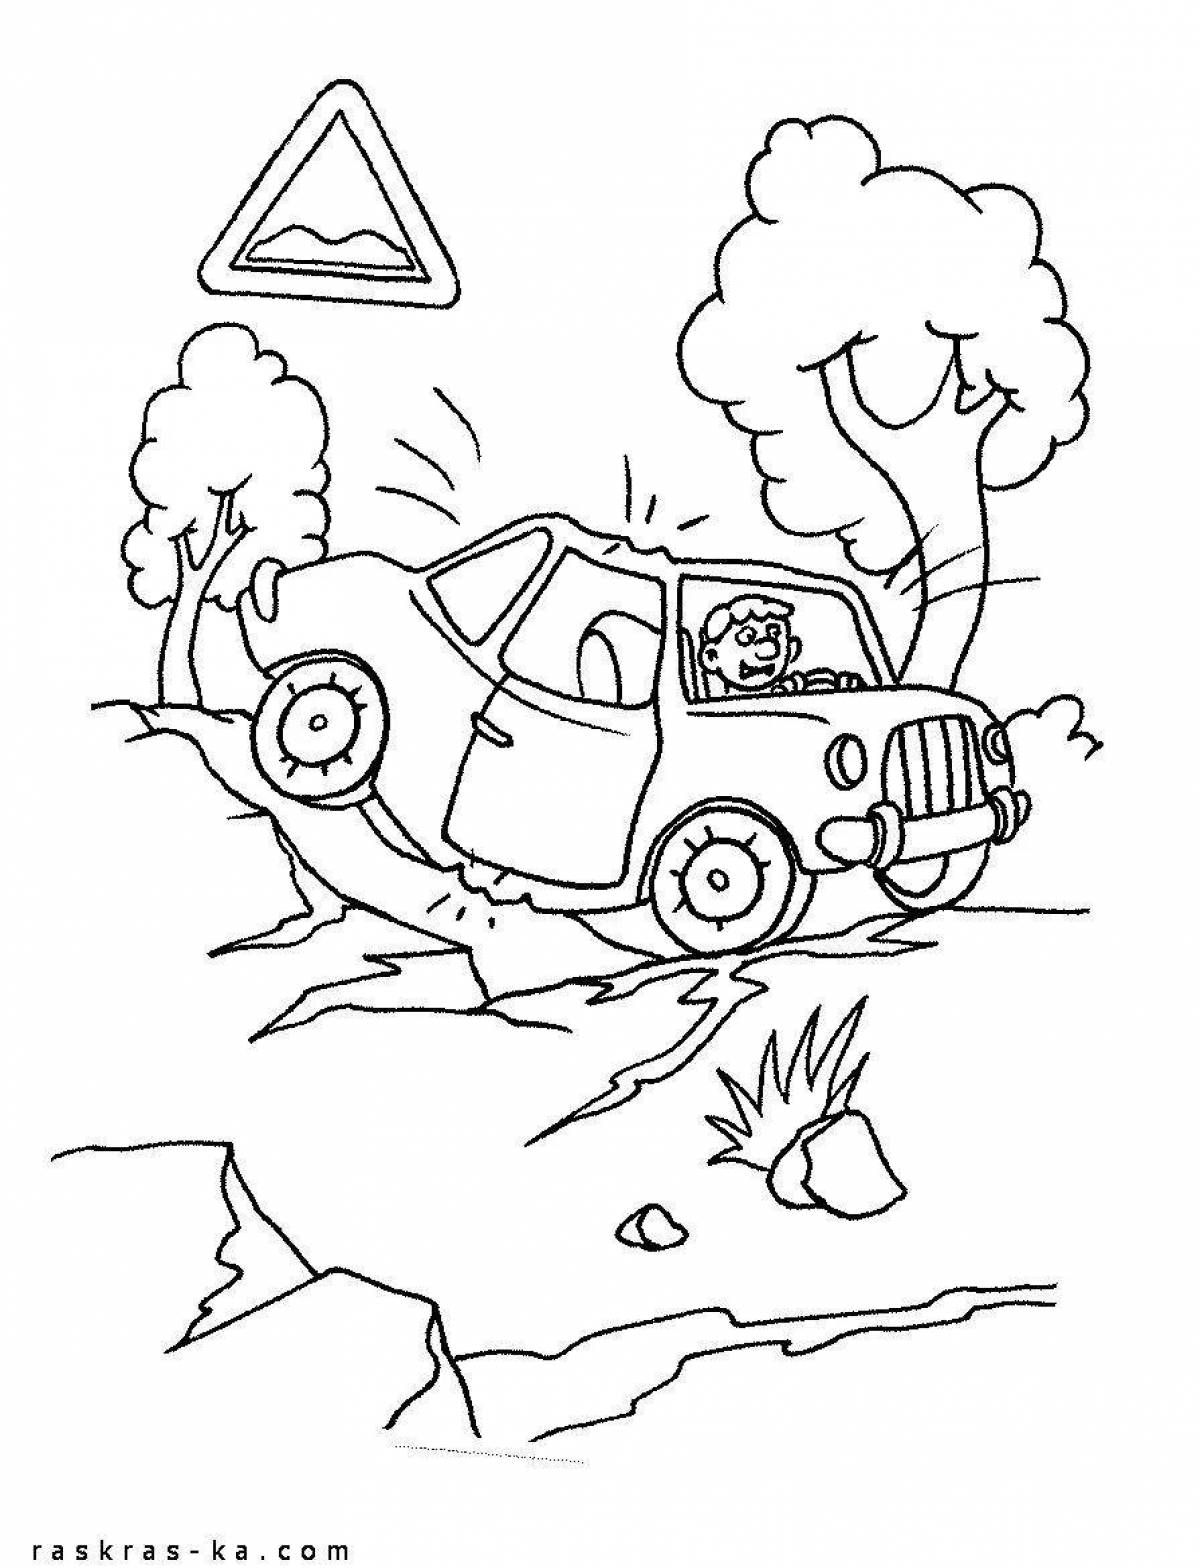 Intriguing road safety coloring page